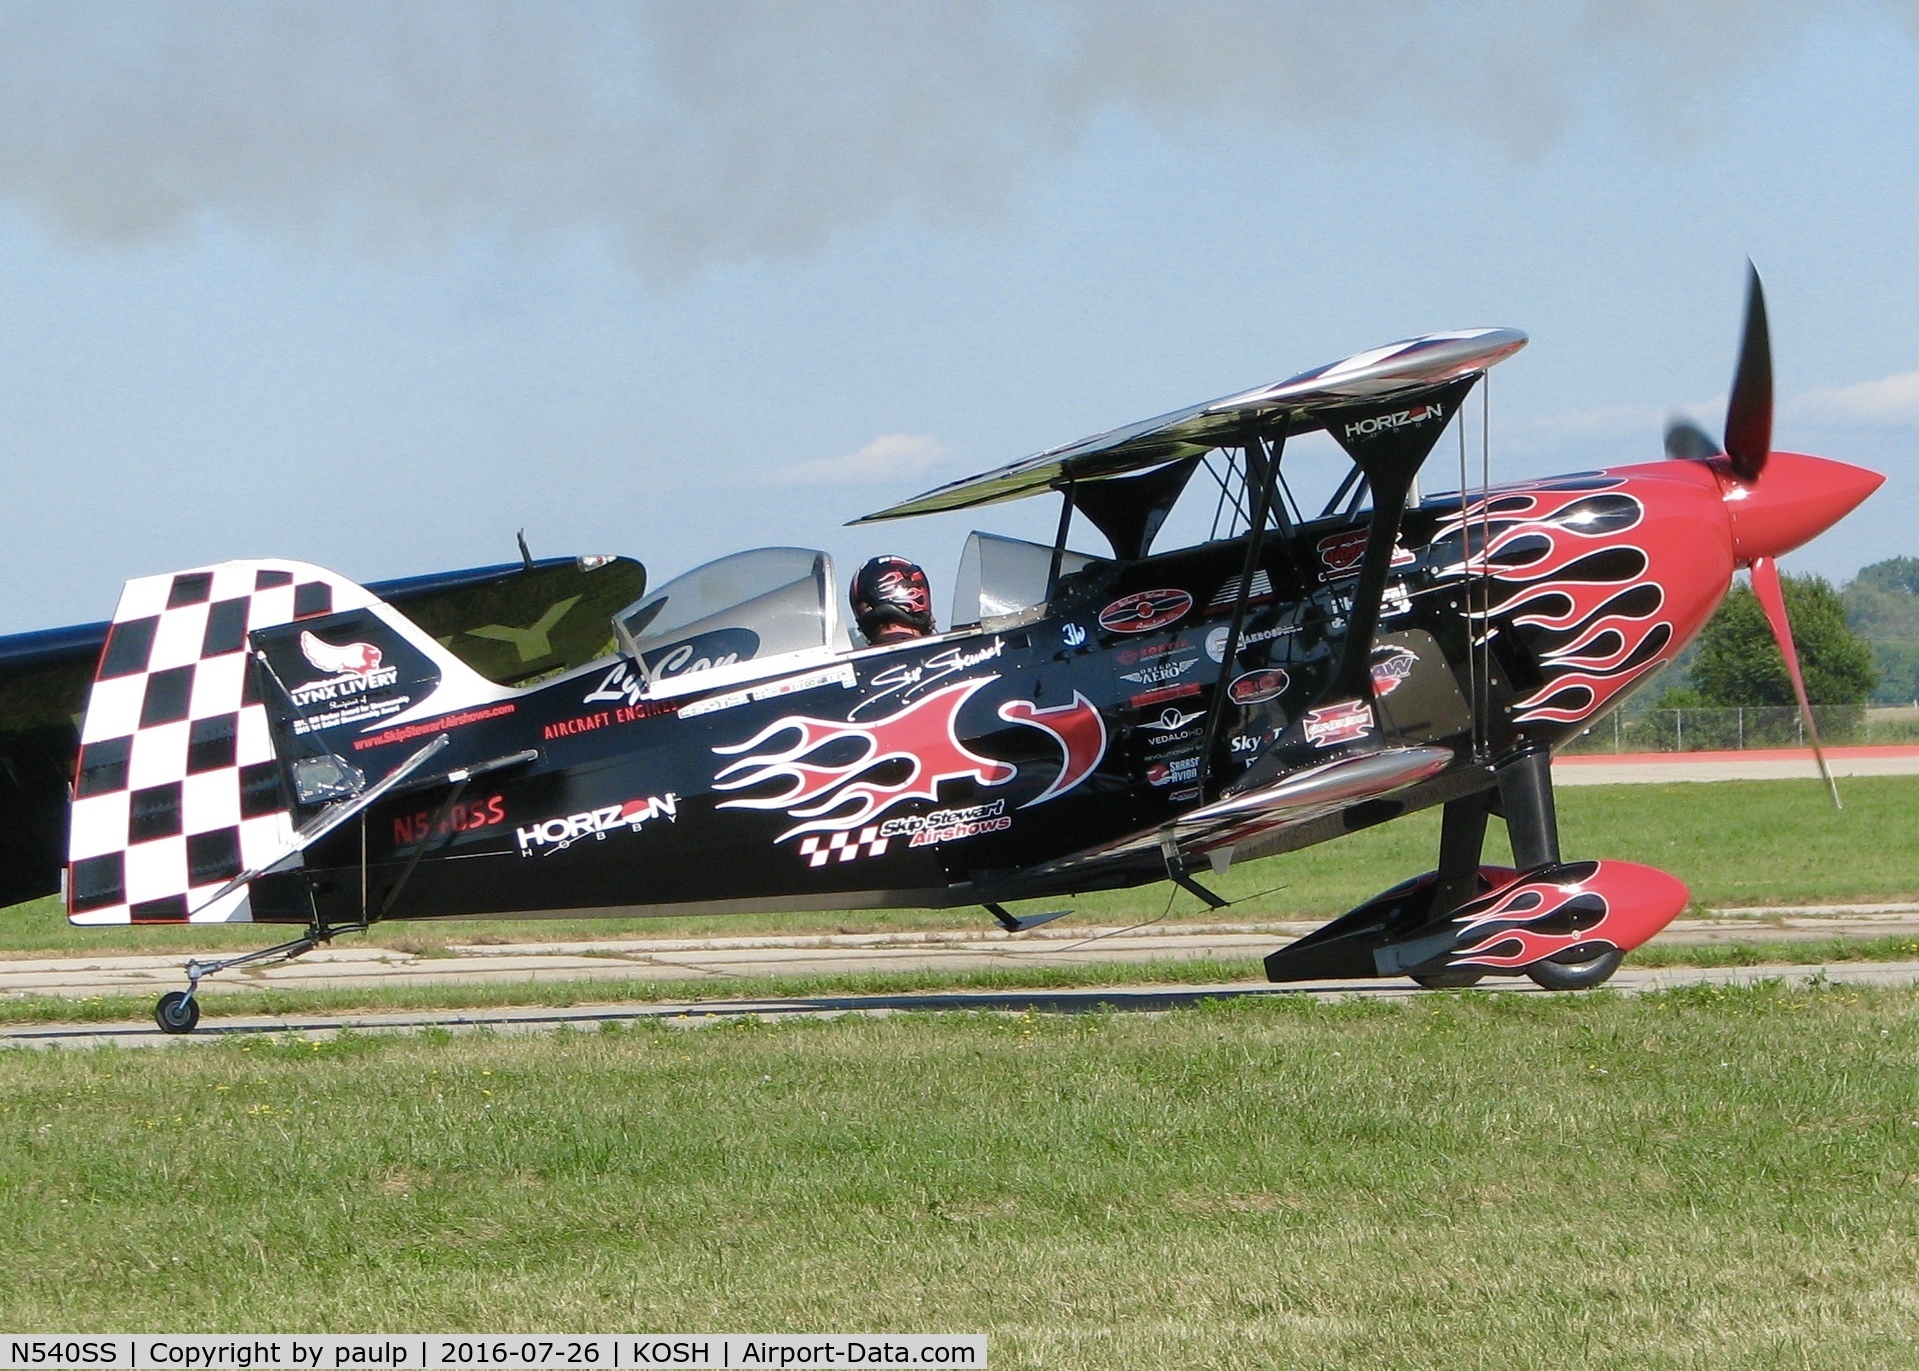 N540SS, 2011 Pitts S-2S Special C/N 006, At AirVenture 2016.